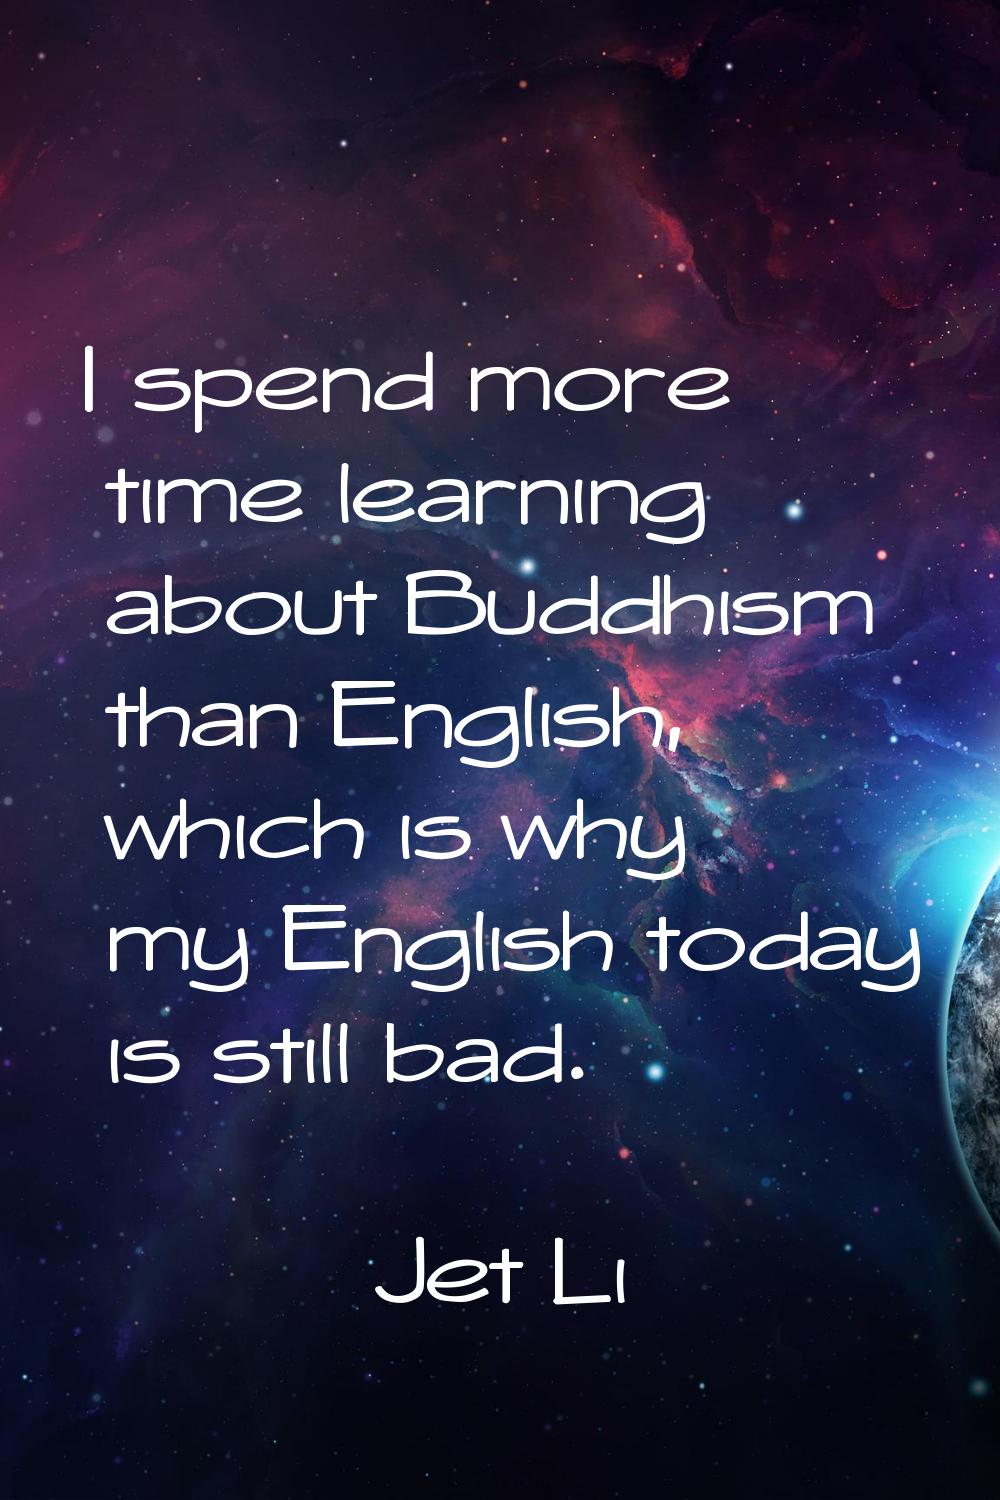 I spend more time learning about Buddhism than English, which is why my English today is still bad.